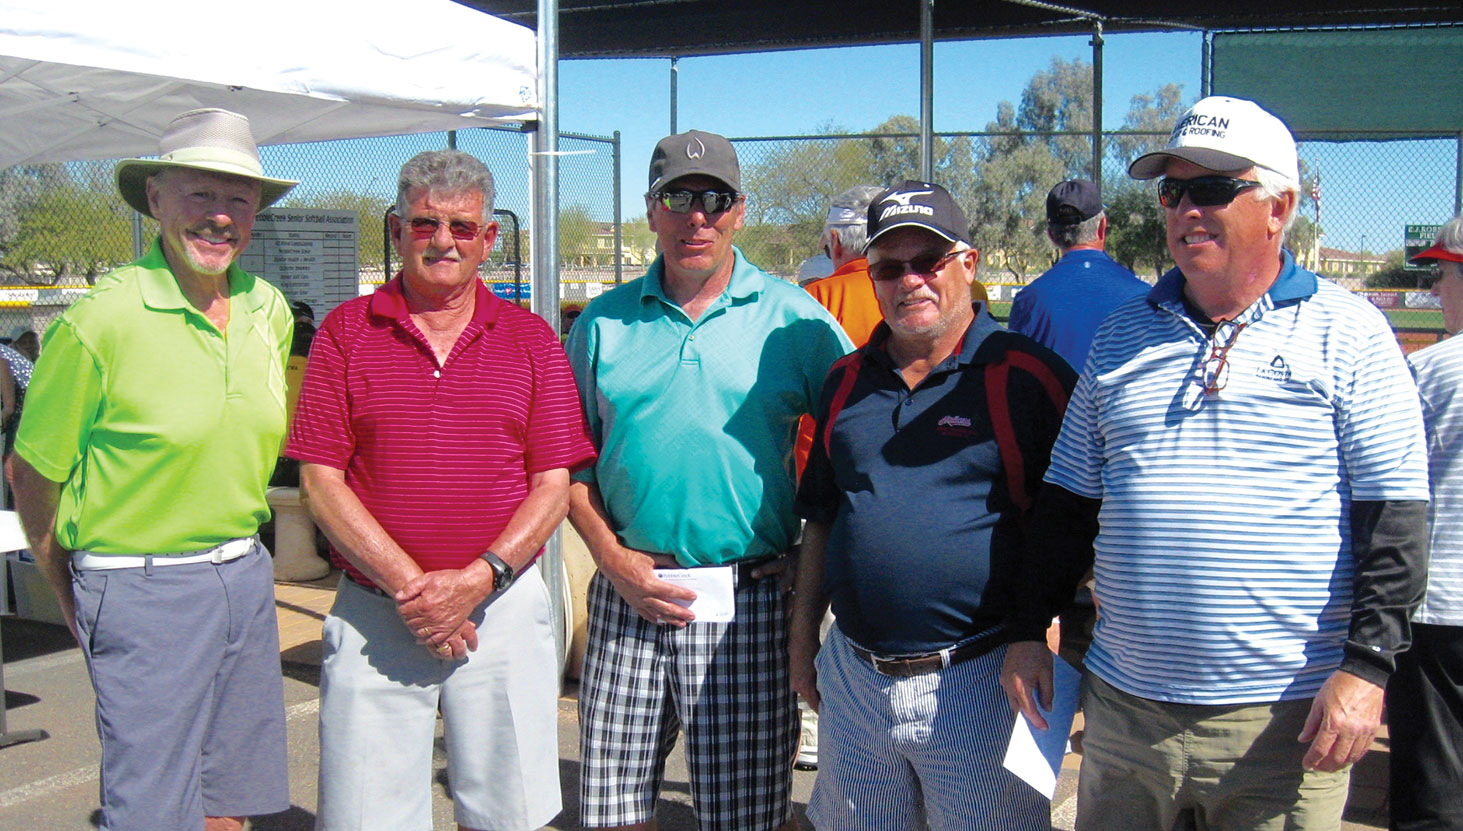 Closest to the Pin/Straightest Drive winners: Dean Bass, Norm Munger, Bill Wallschlaeger, Larry McMaster (West Valley Golf Cars) and Bob Brett (Straightest Drive)